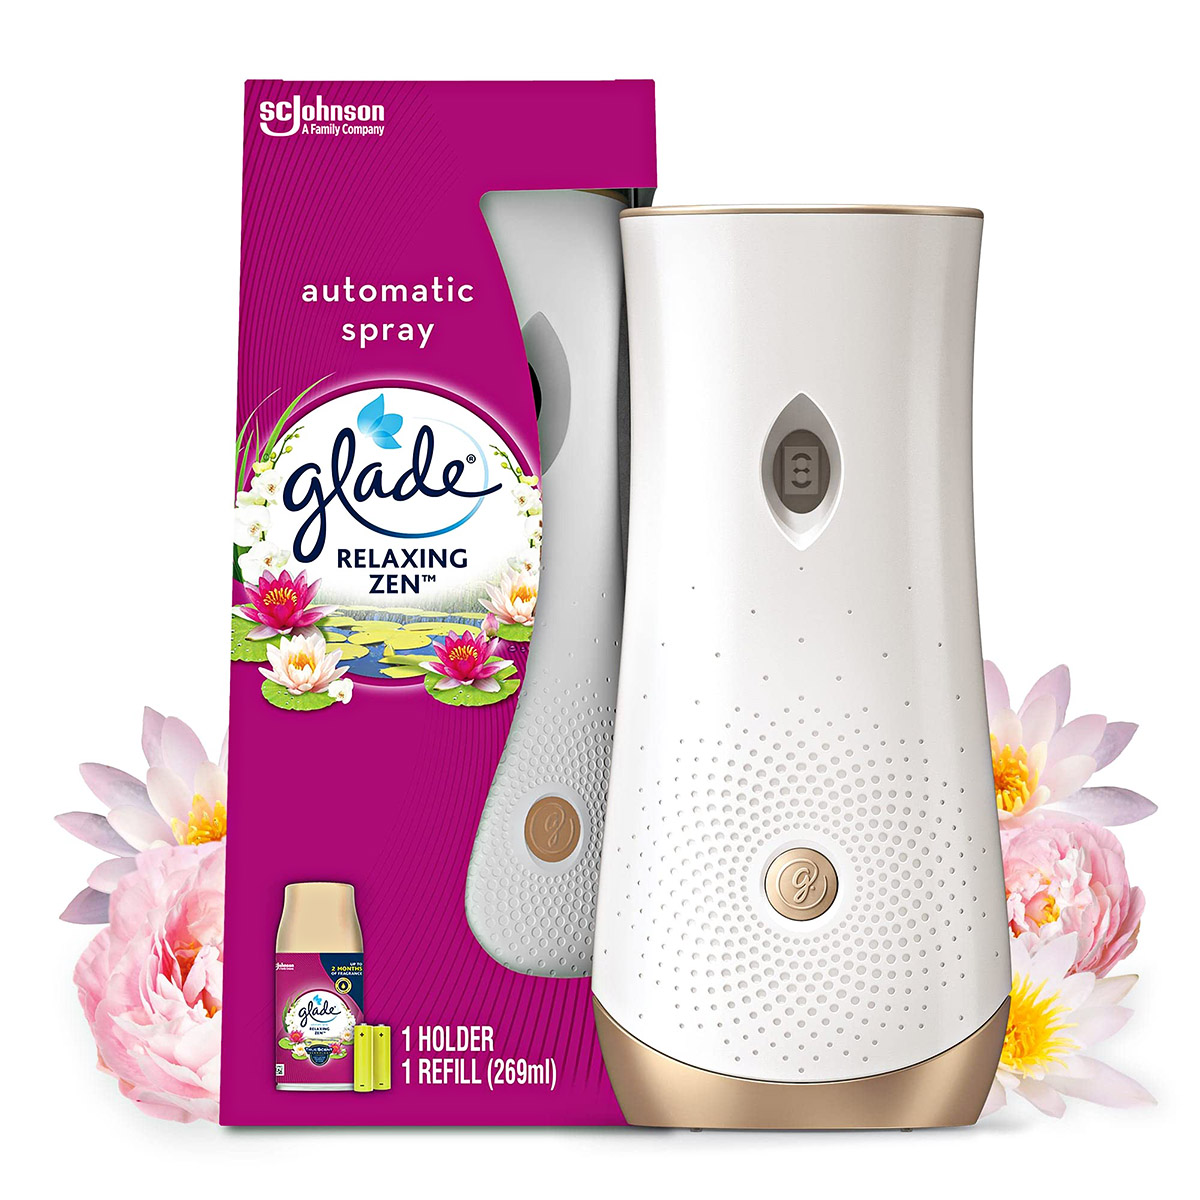 How To Use Glade Air Freshener